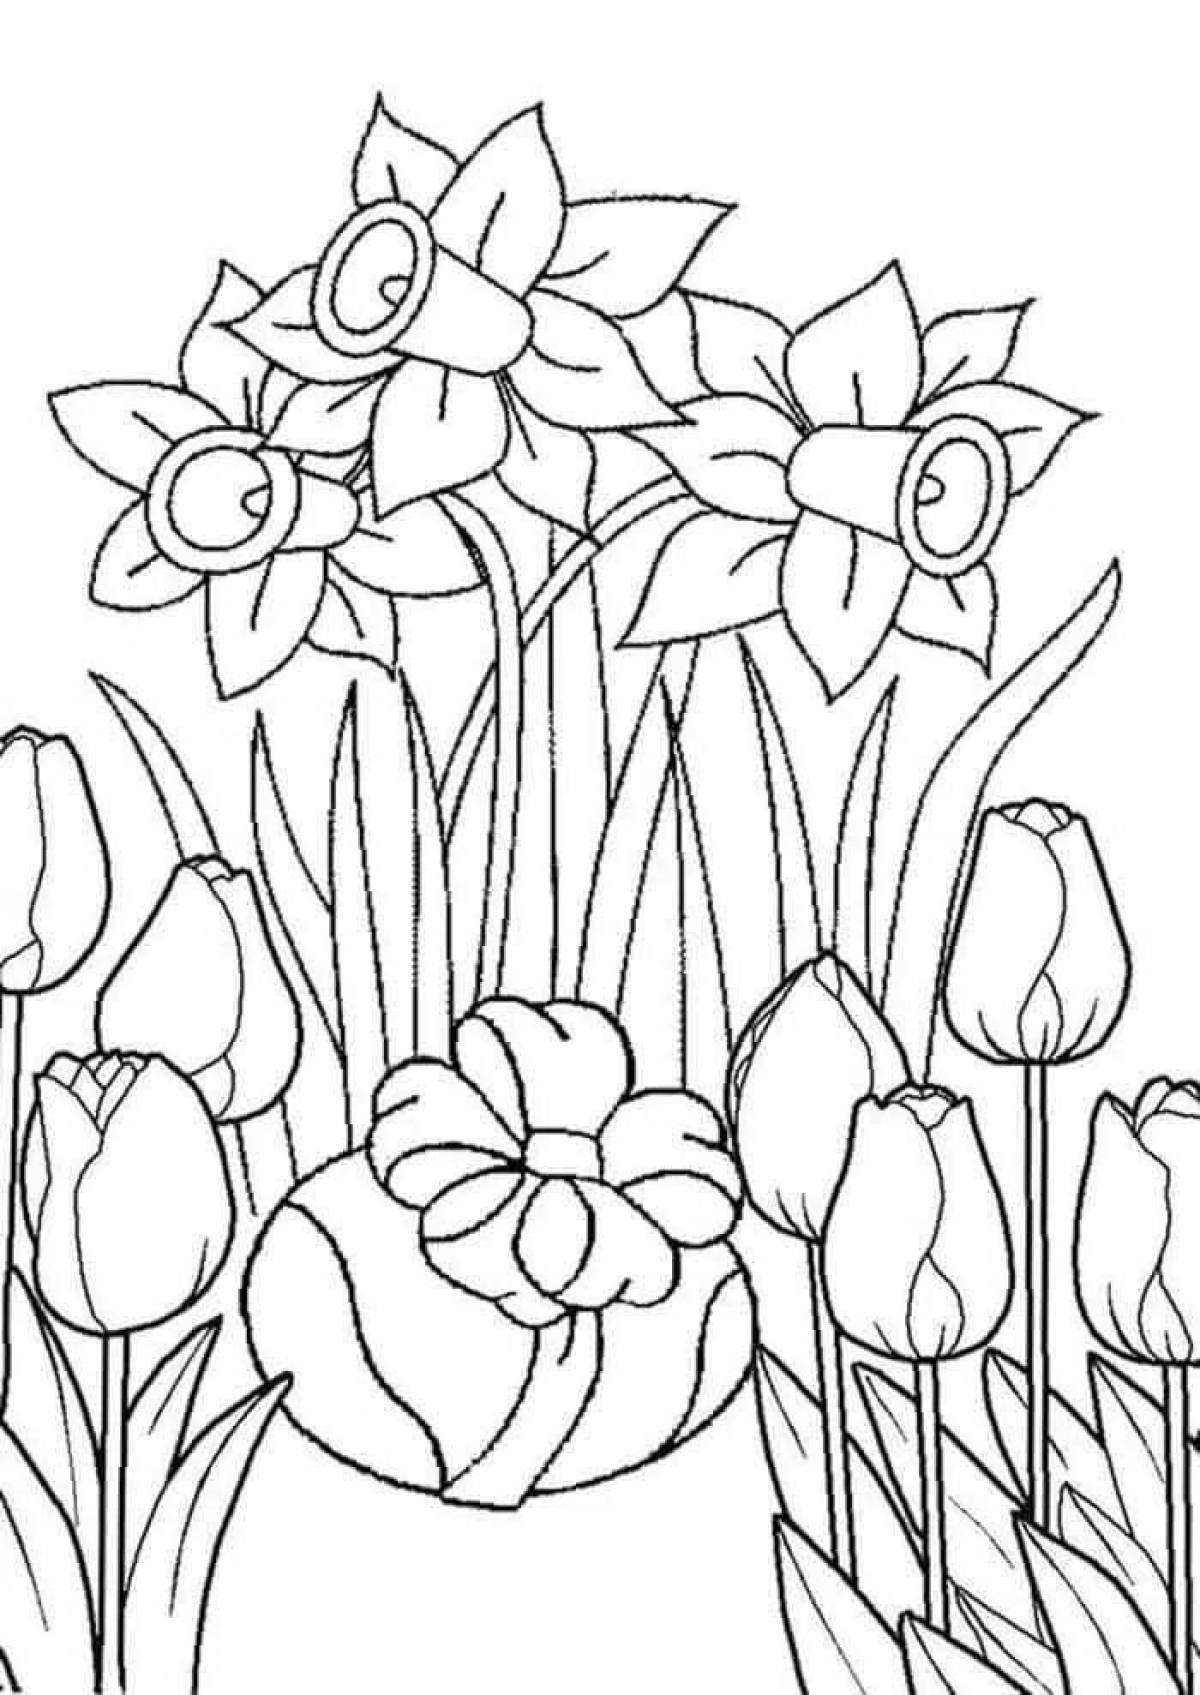 Coloring book of cheerful tulips